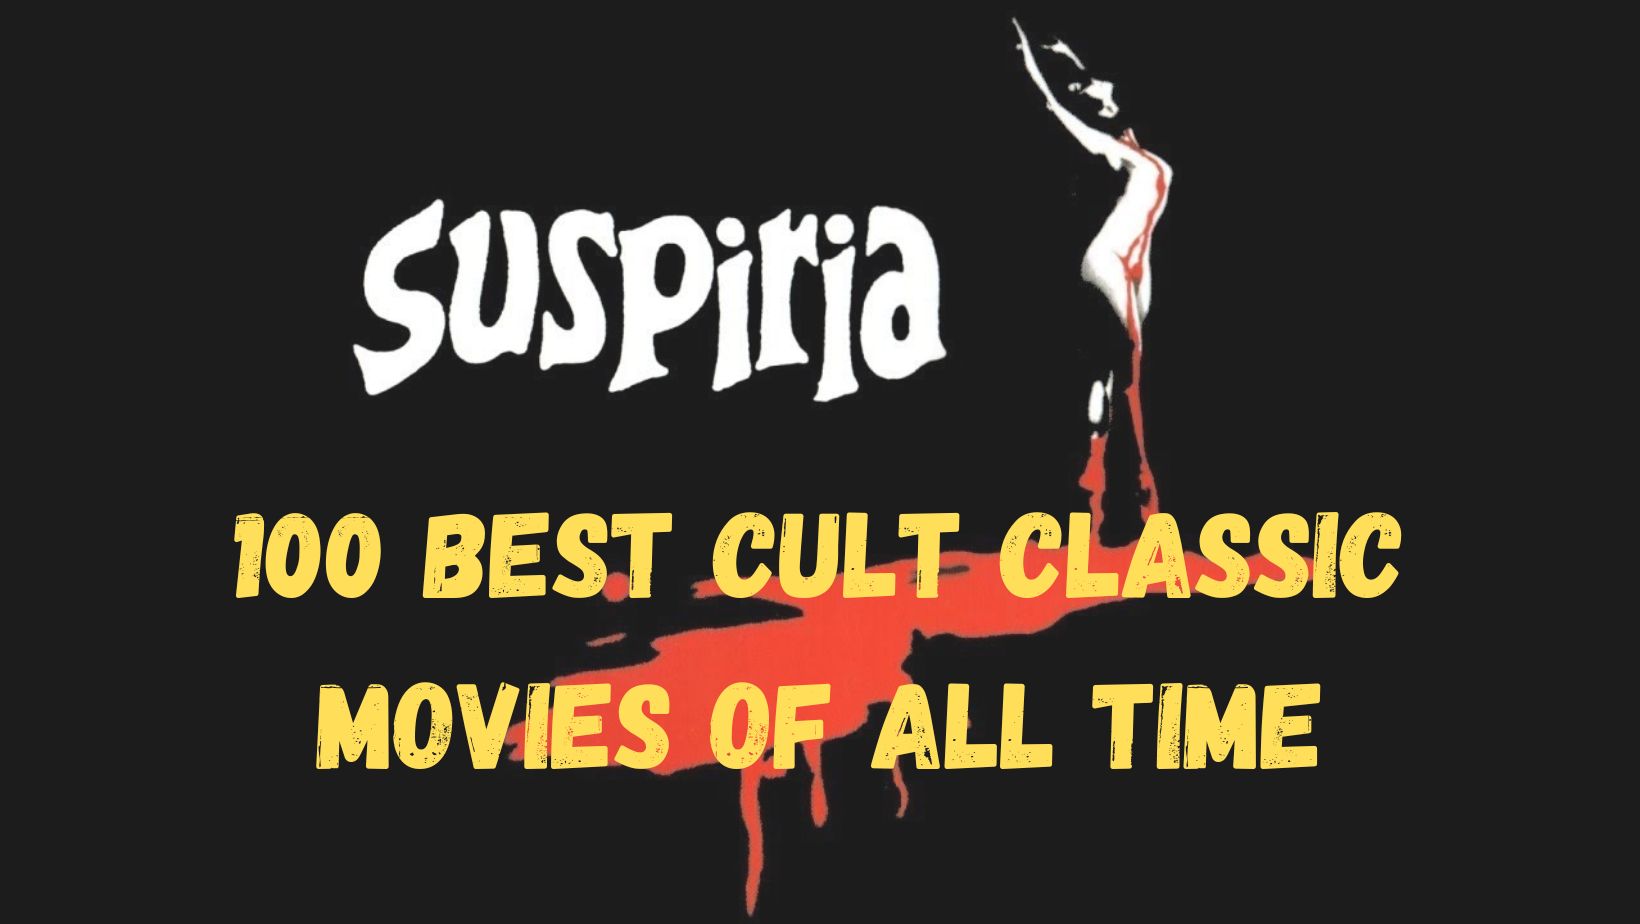 100 best cult classic movies of all time